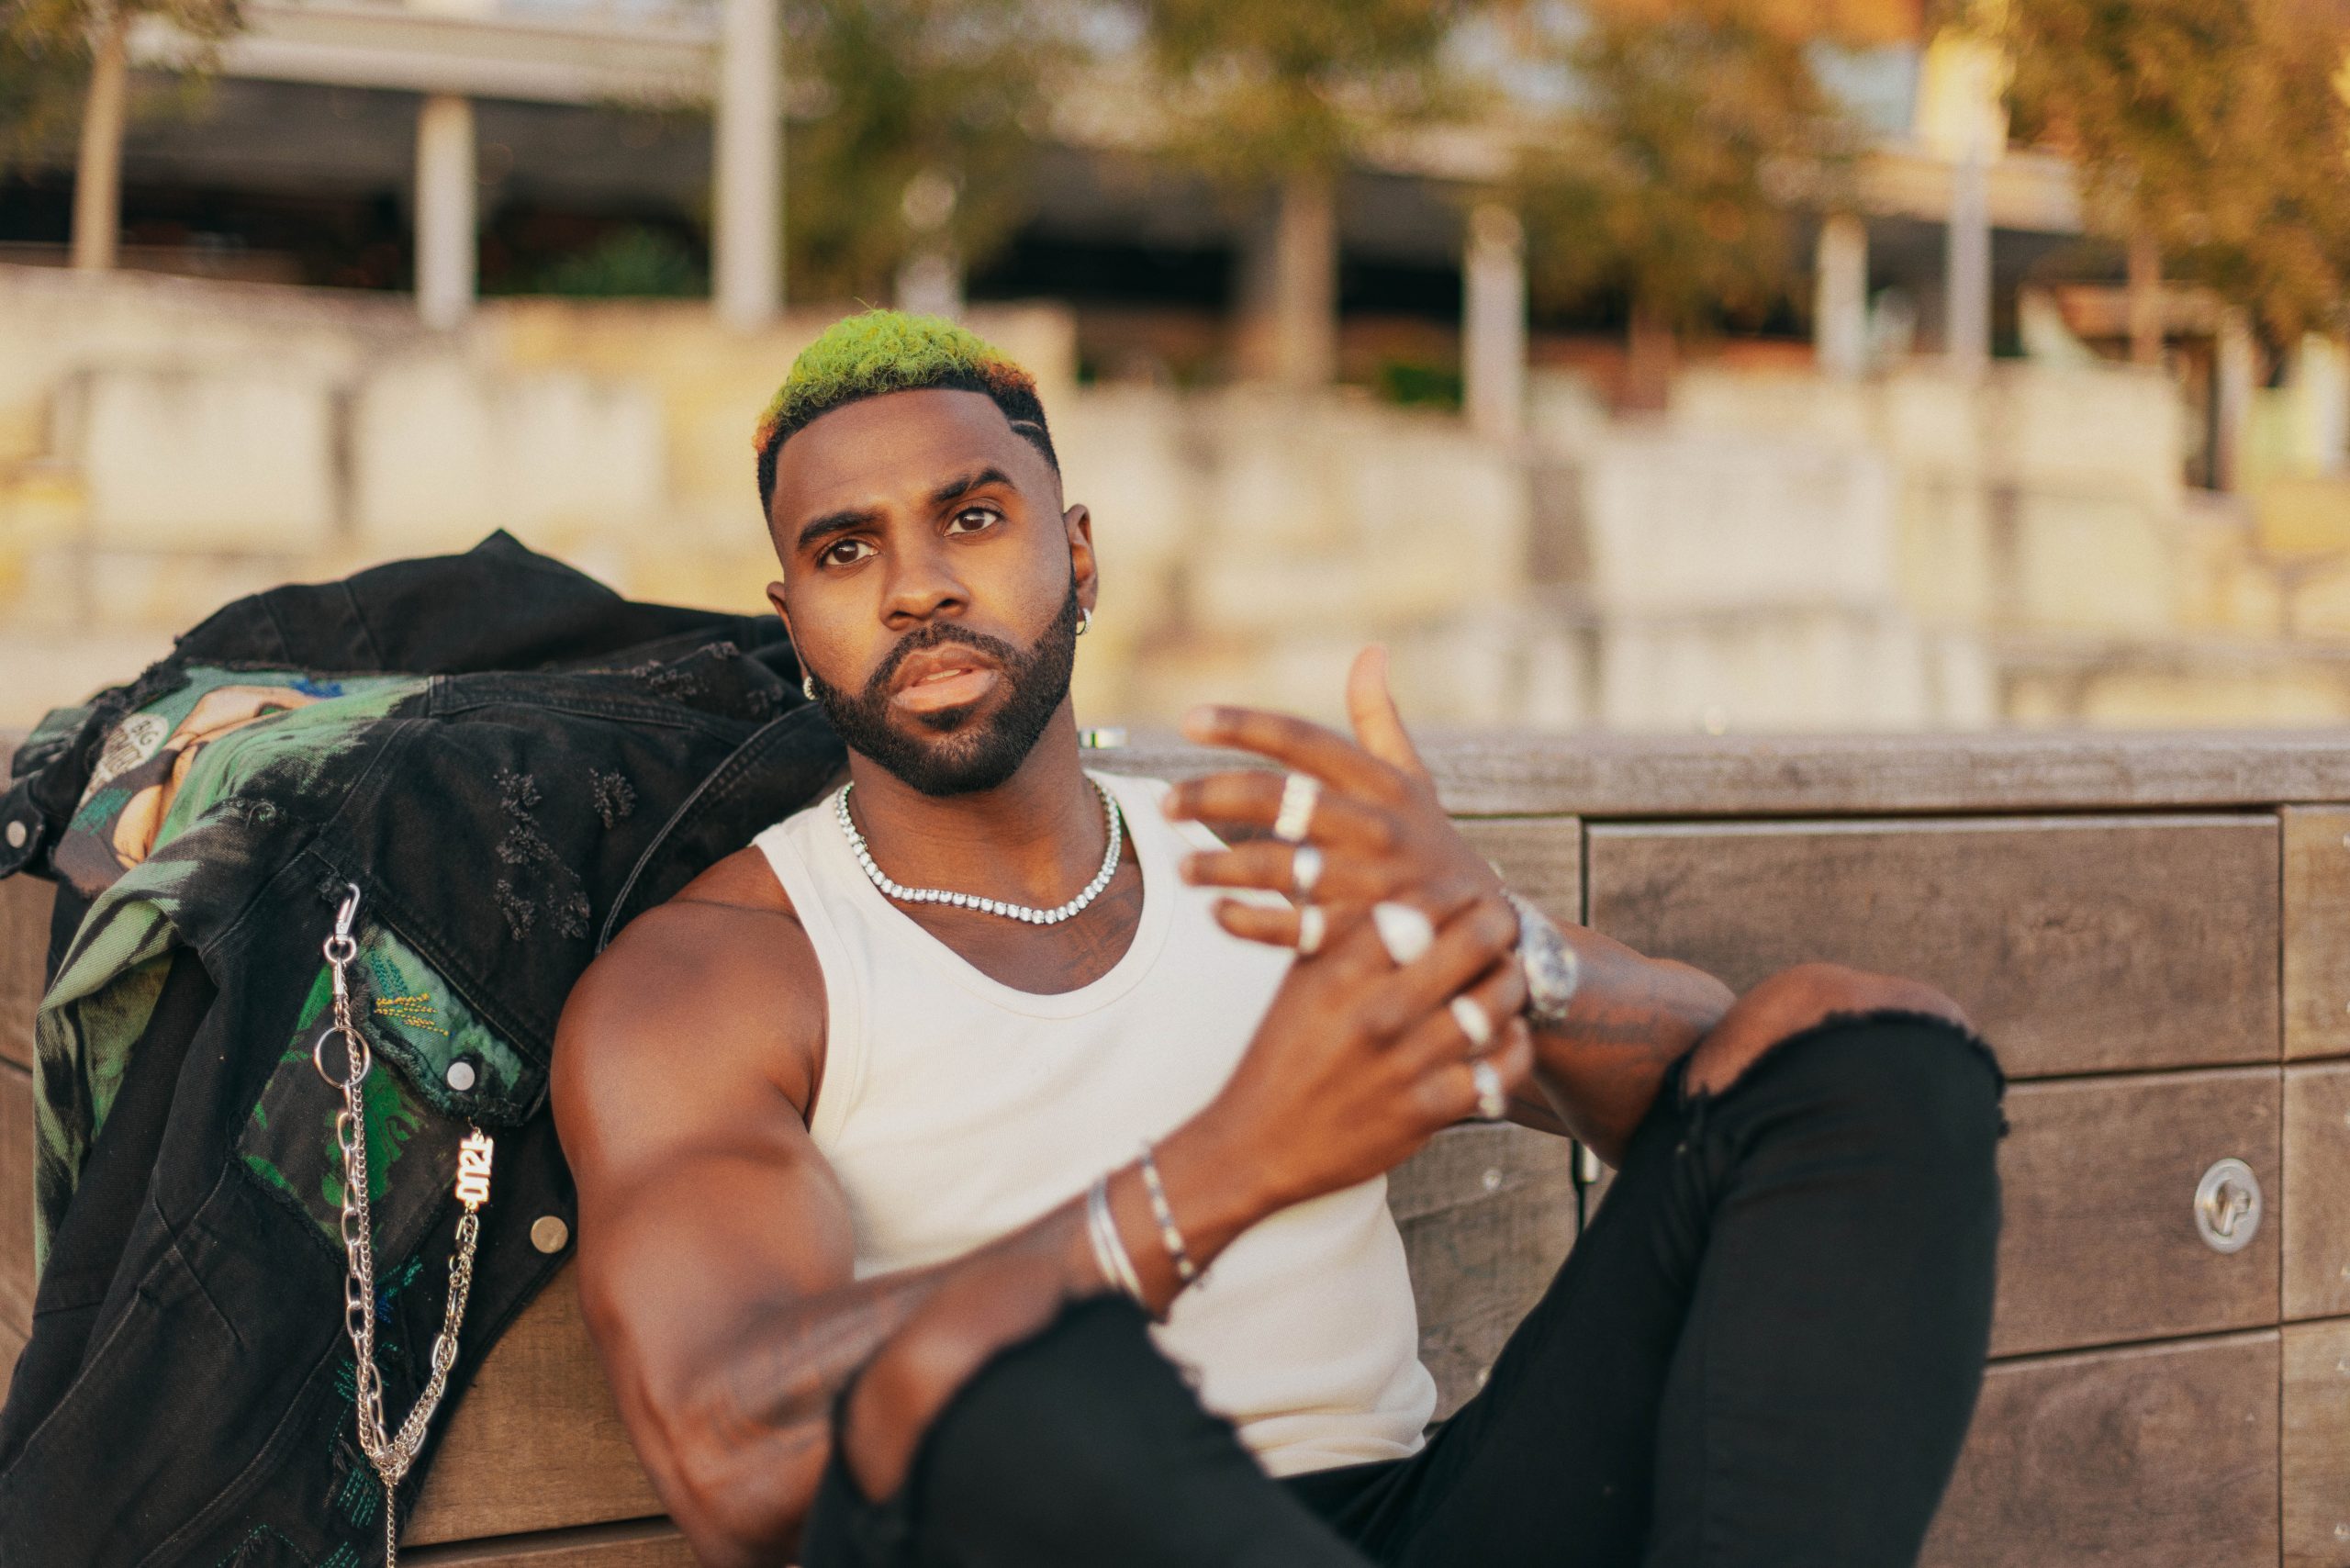 JASON DERULO LIFTS THE VEIL ON NU KING / THE MULTI-PLATINUM SUPERSTAR’S FIRST ALBUM SINCE 2015 – OUT NOW